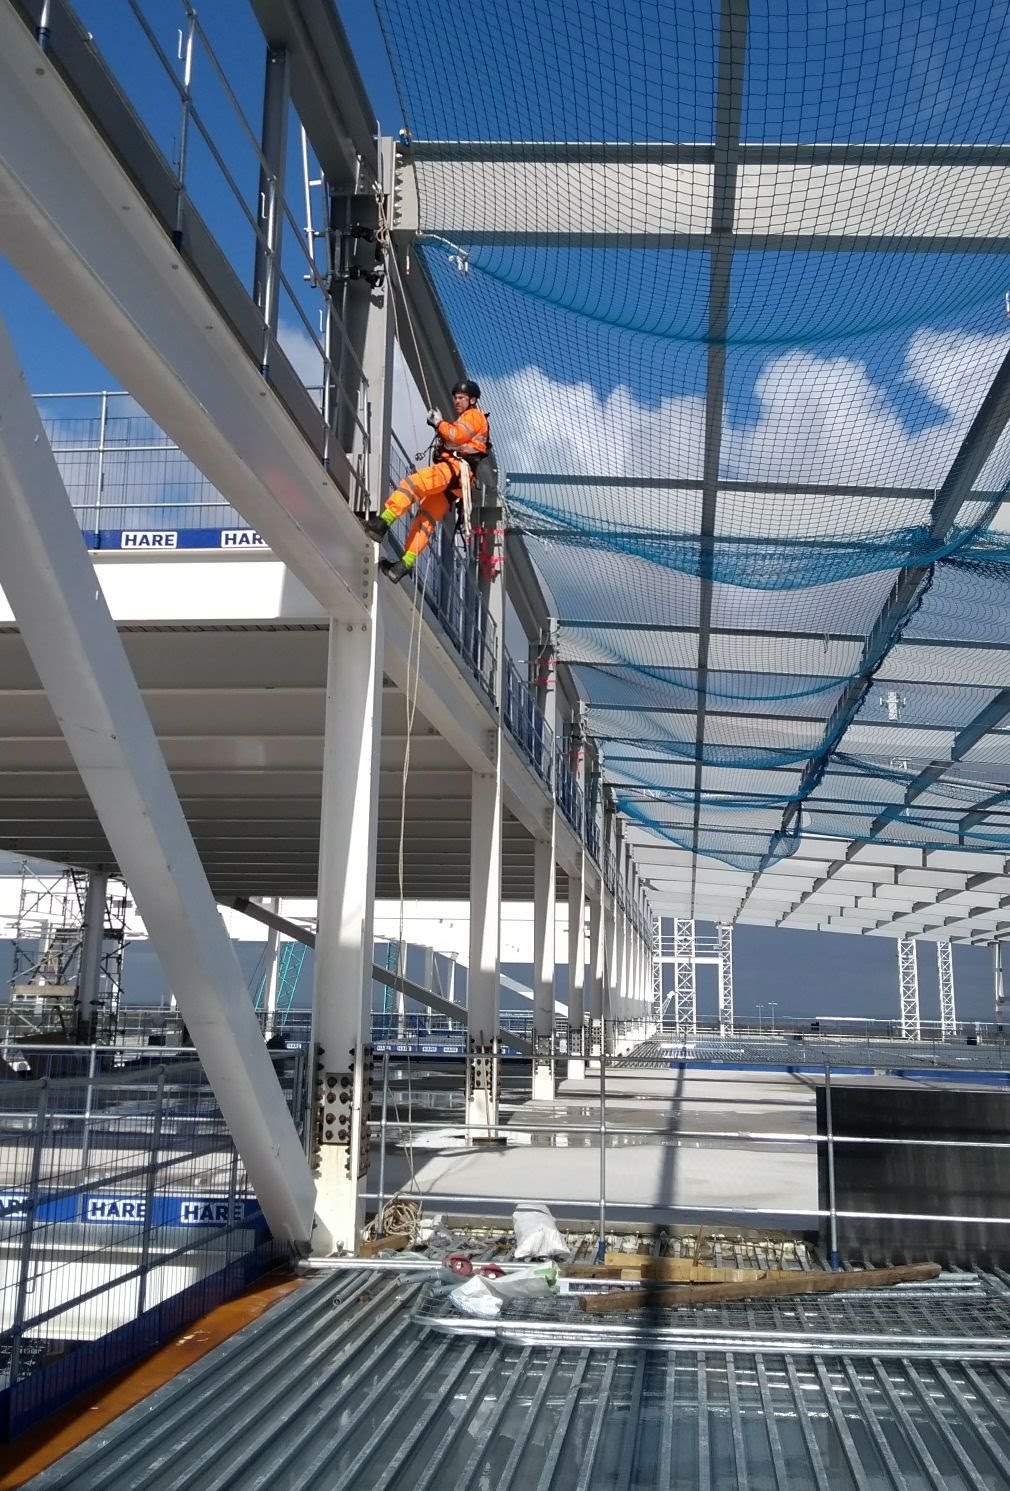 Manchester Airport Safety Netting and Edge Protection